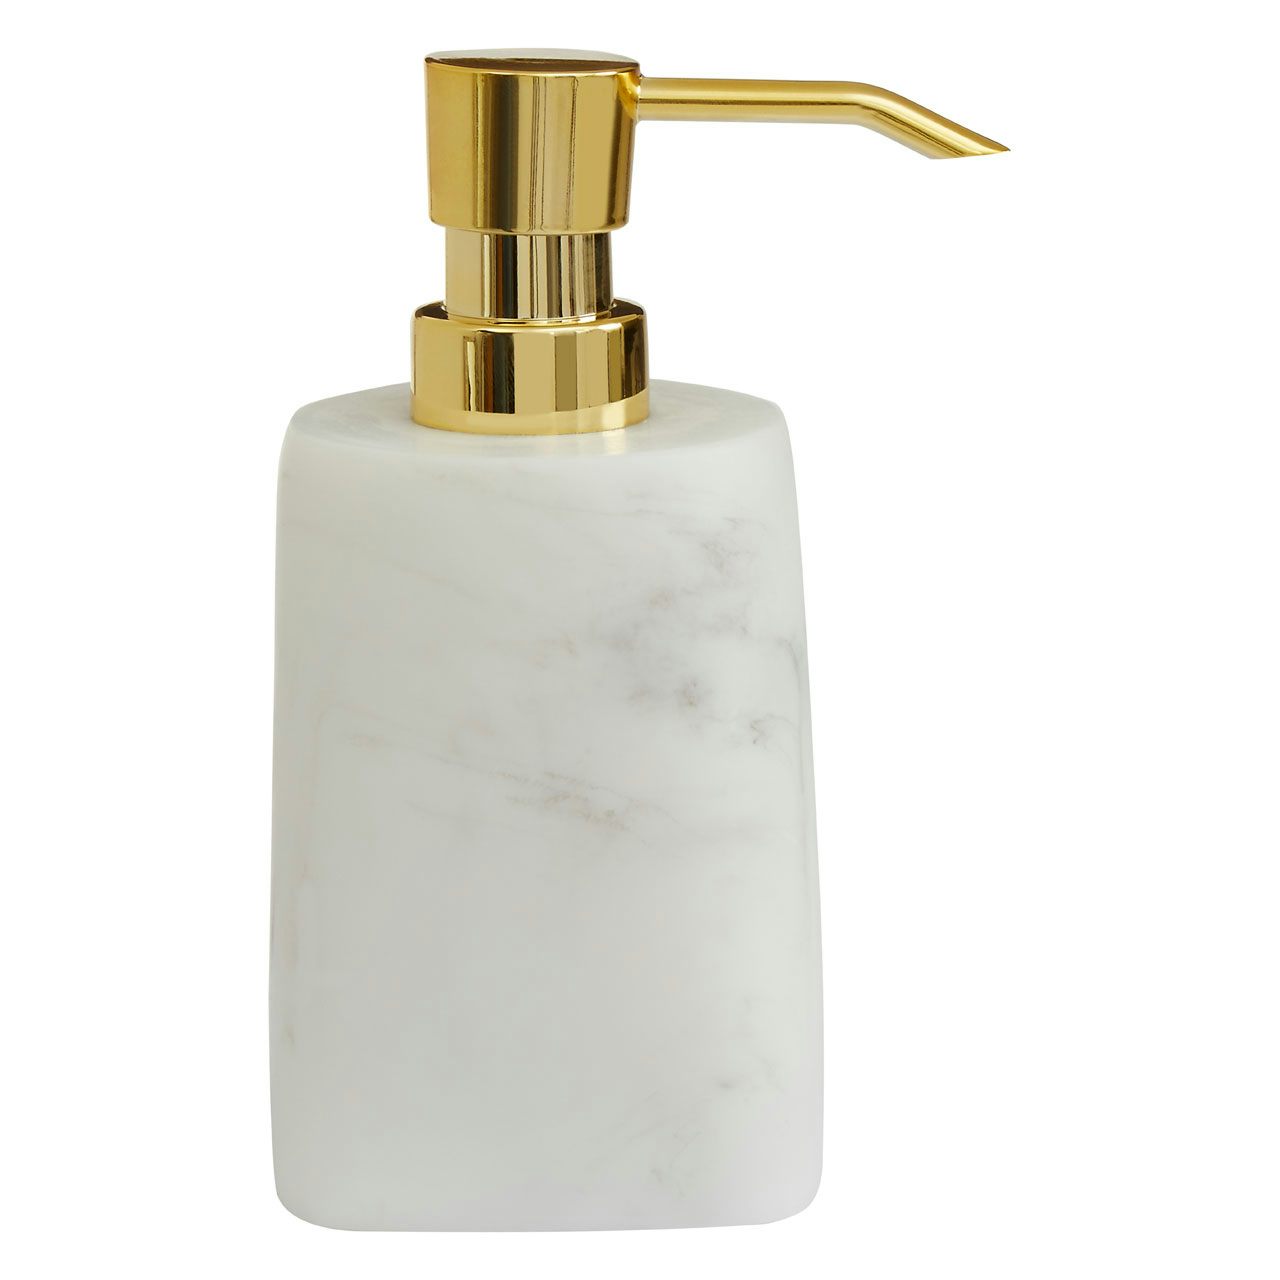 Accents Riviera smooth white marble soap dispenser